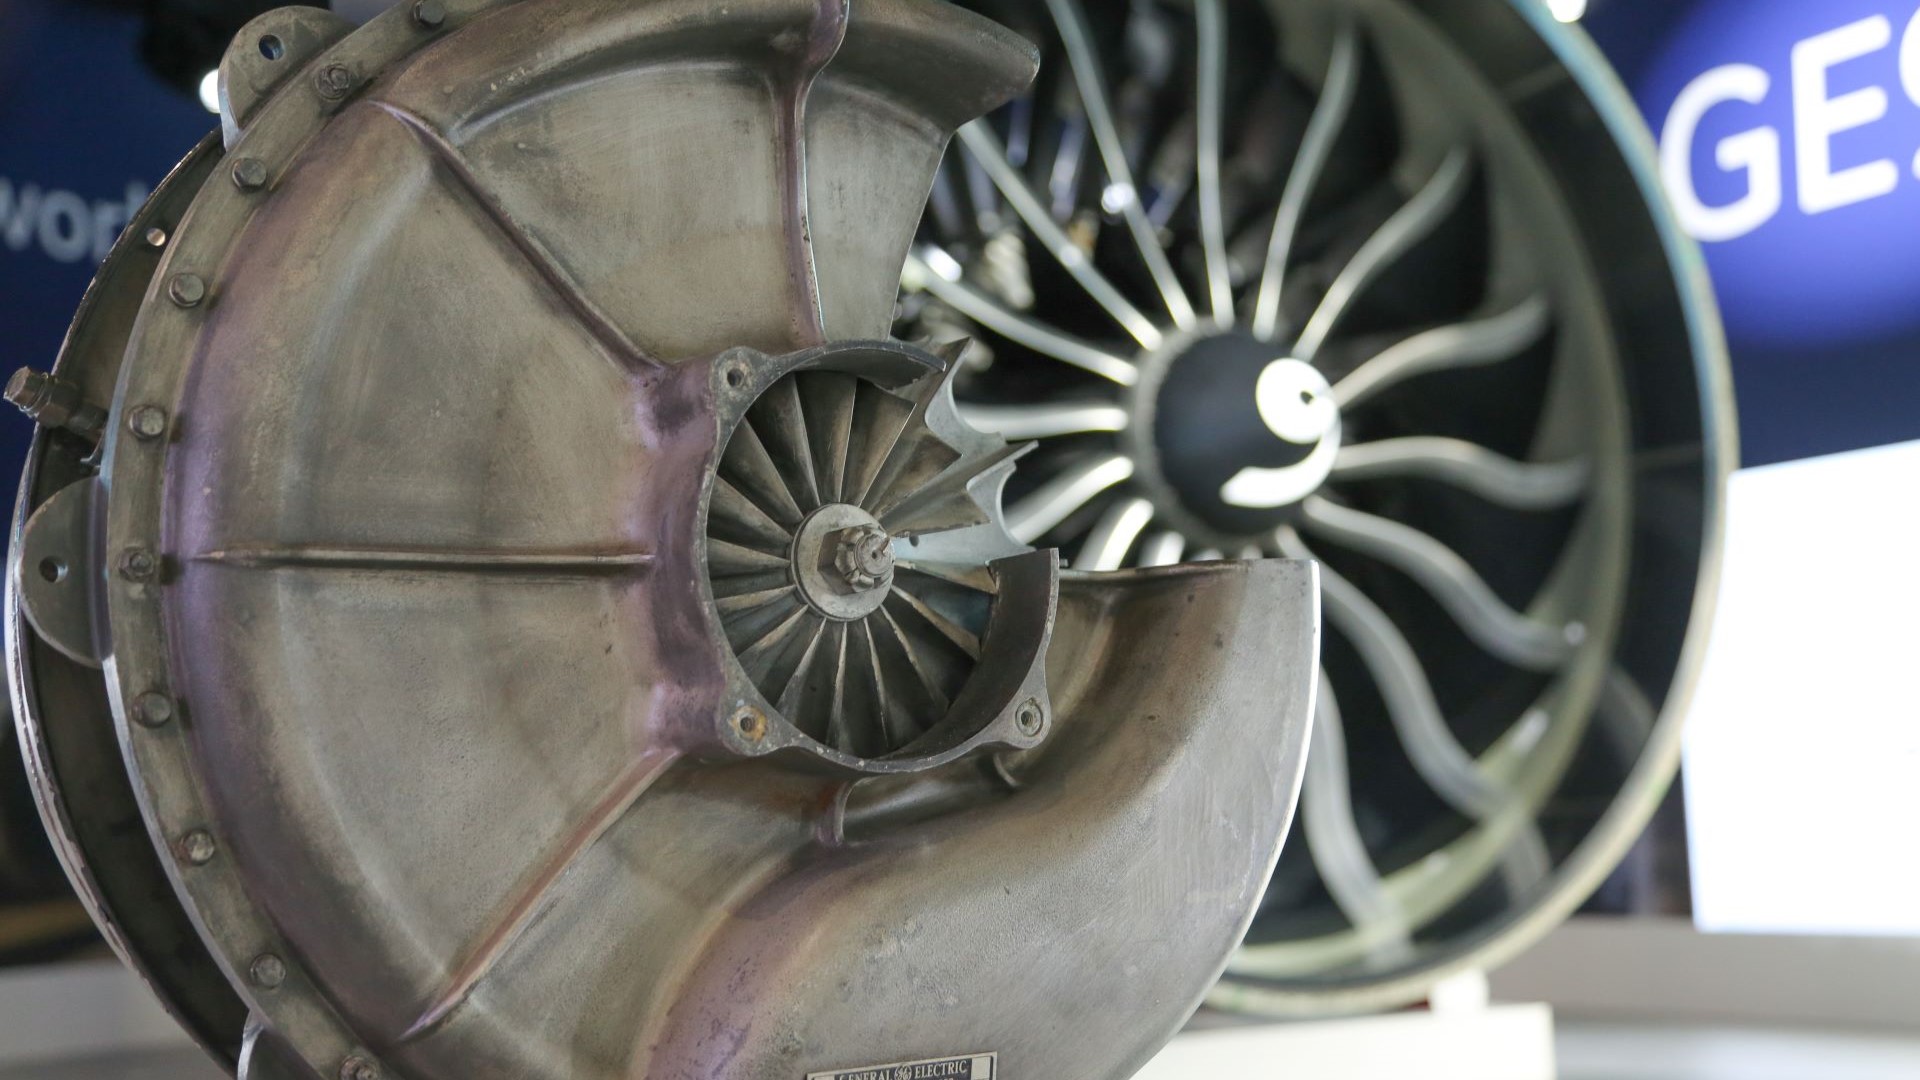 Moss turbosupercharger and the GE9X